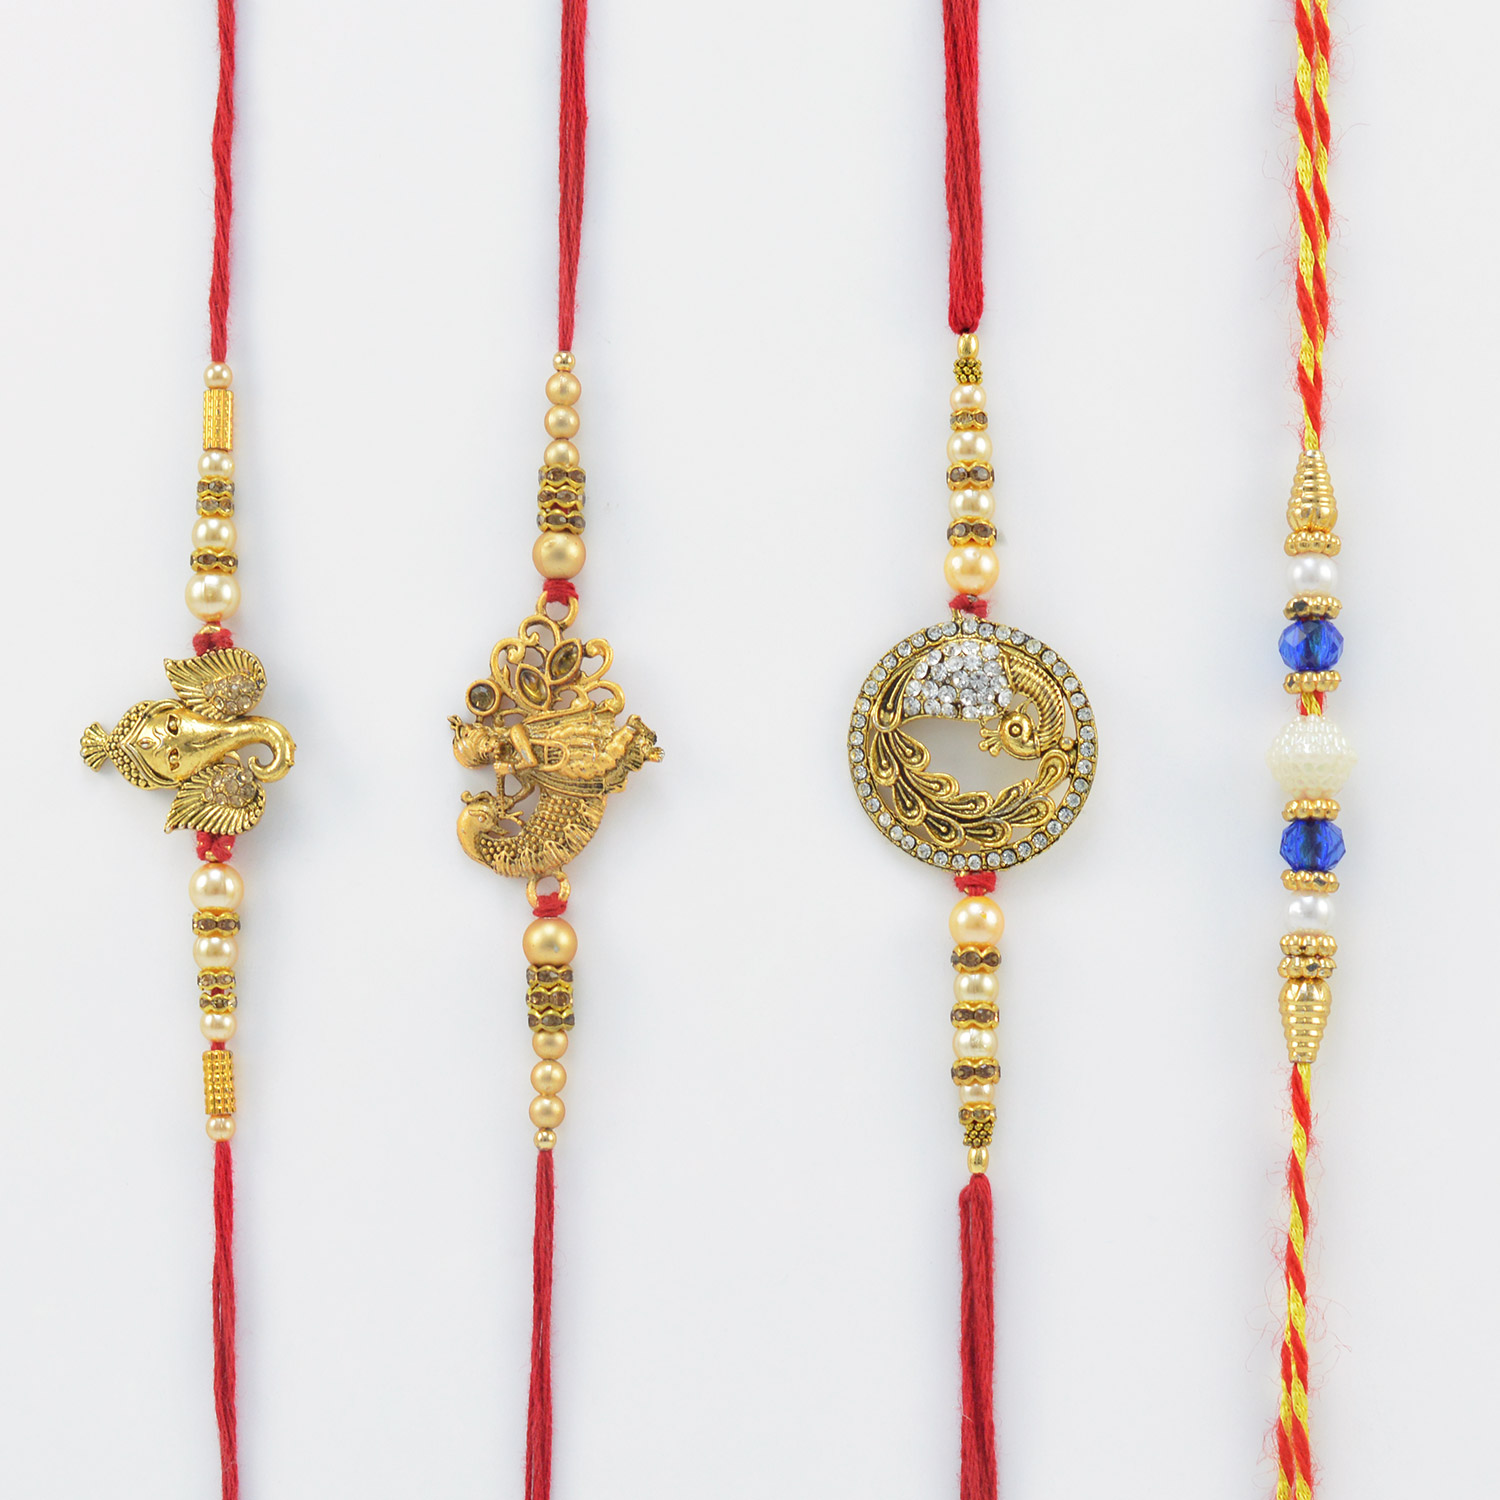 Golden Color and Beads Rakhi Set of 4 for Brother